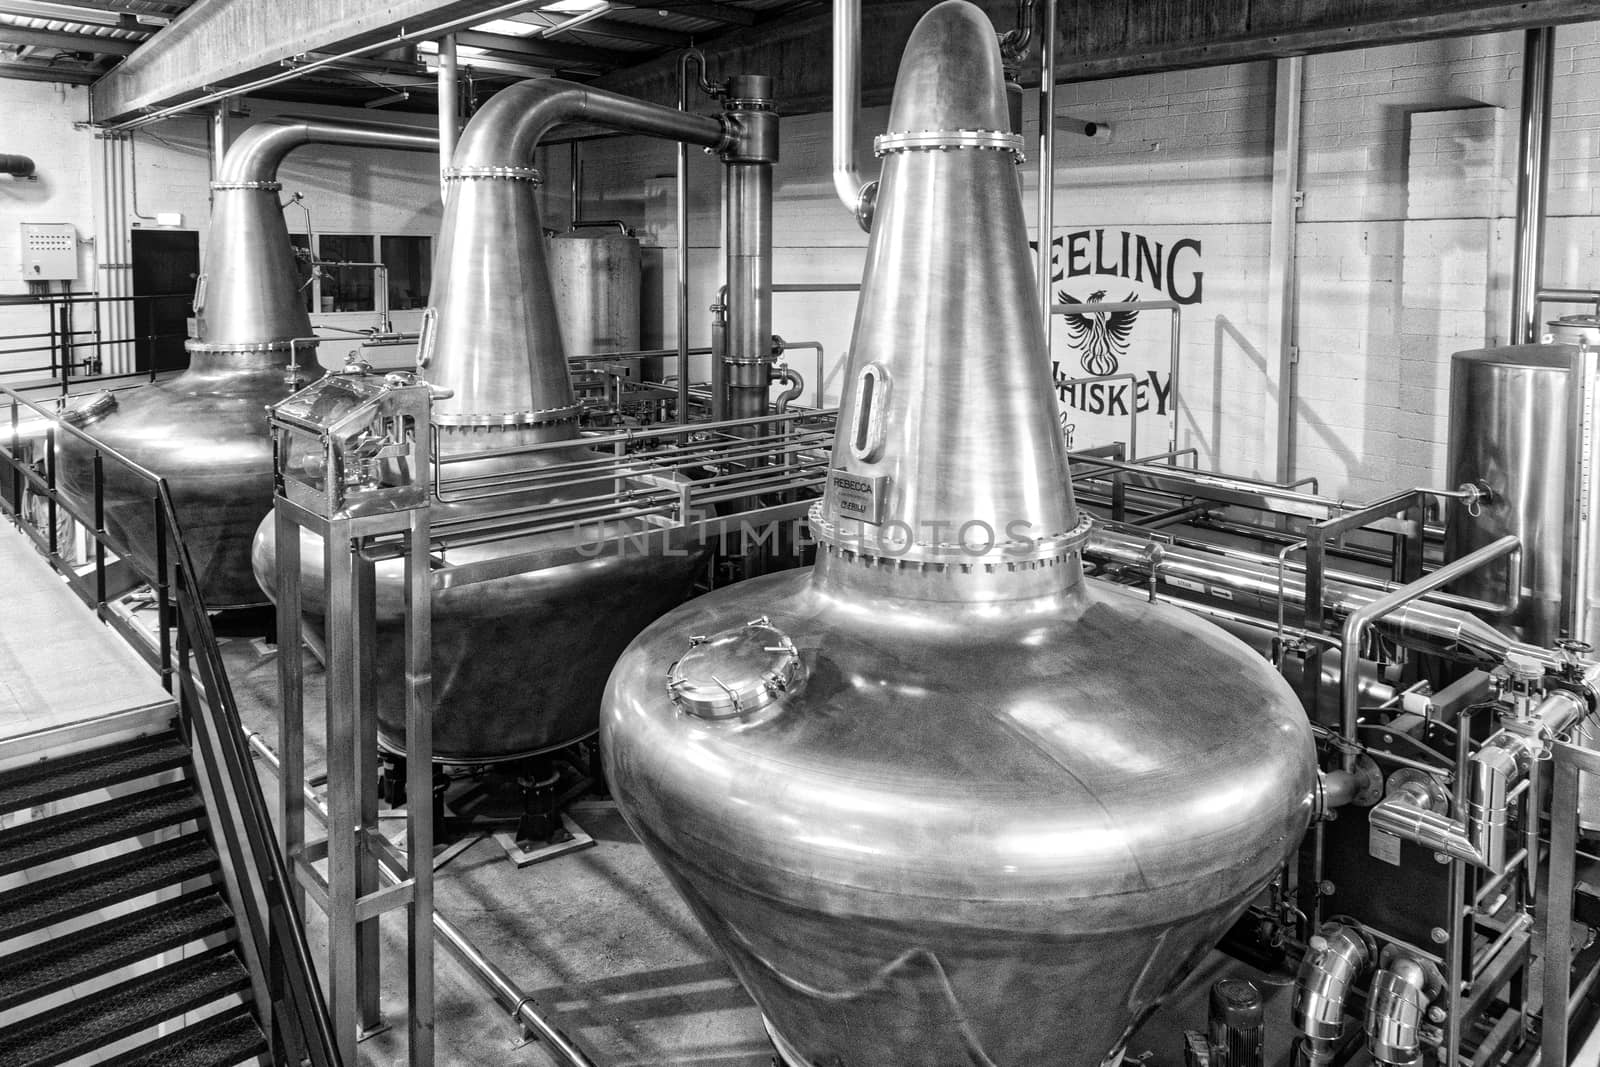 Dublin, Ireland, JAN 20 2017, These are the copper kettles of the Teeling Whiskey distillery. Picture in Black and White by mlechanteur